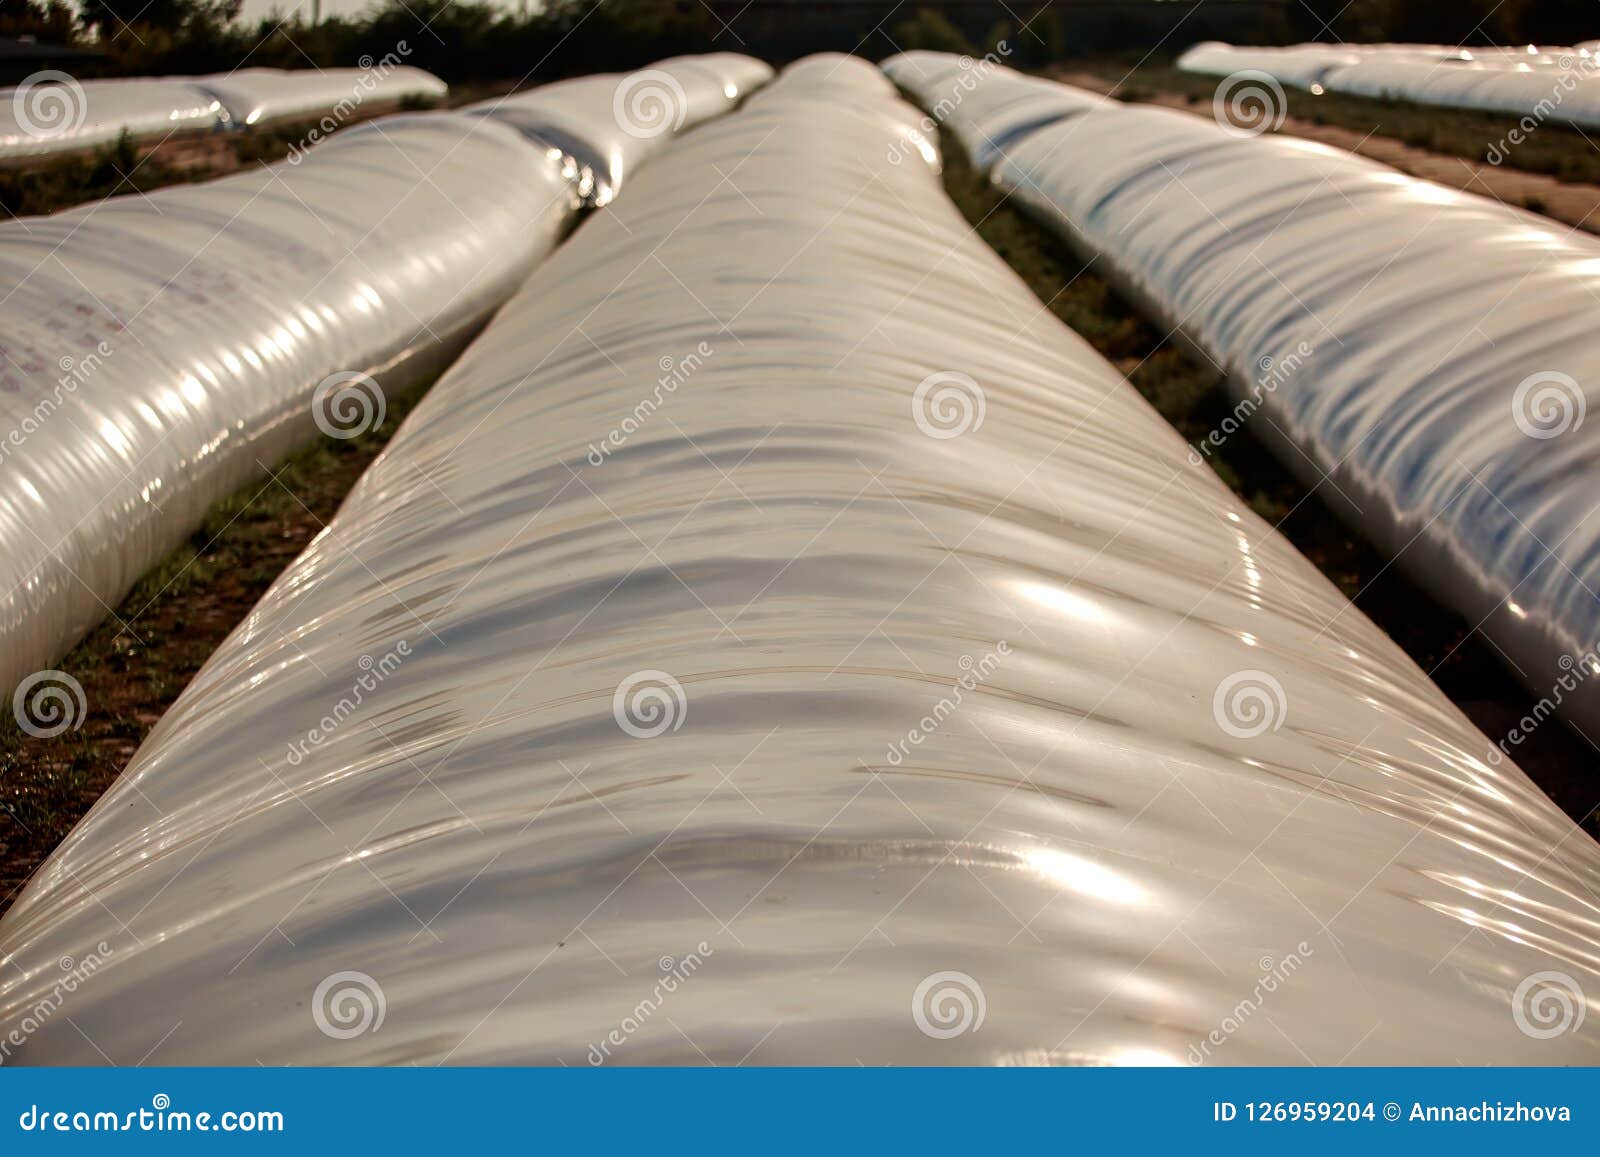 silo bag in a farm with fence and field. rural, countryside image, agricultural industry scene.